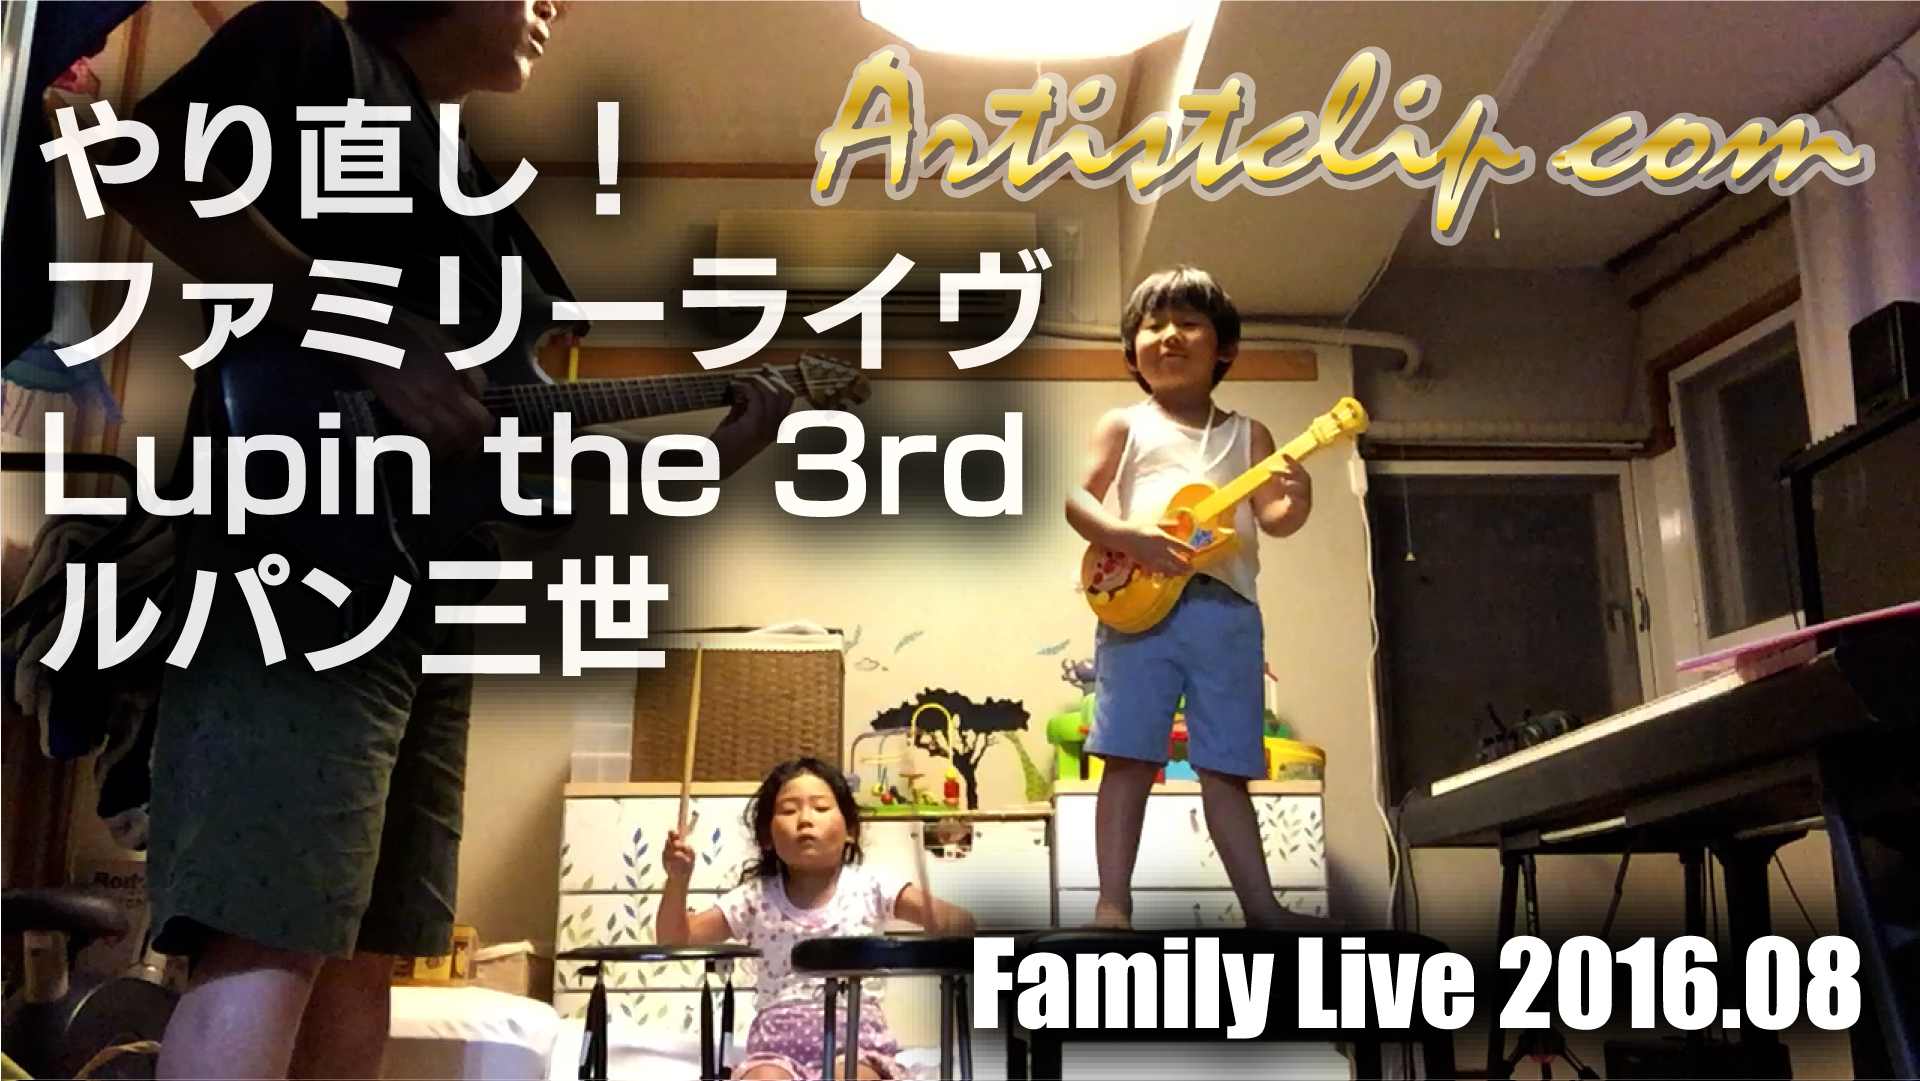 Family Live !!! with Kids 【Lupin the 3rd/ ルパン三世】2016.08.19